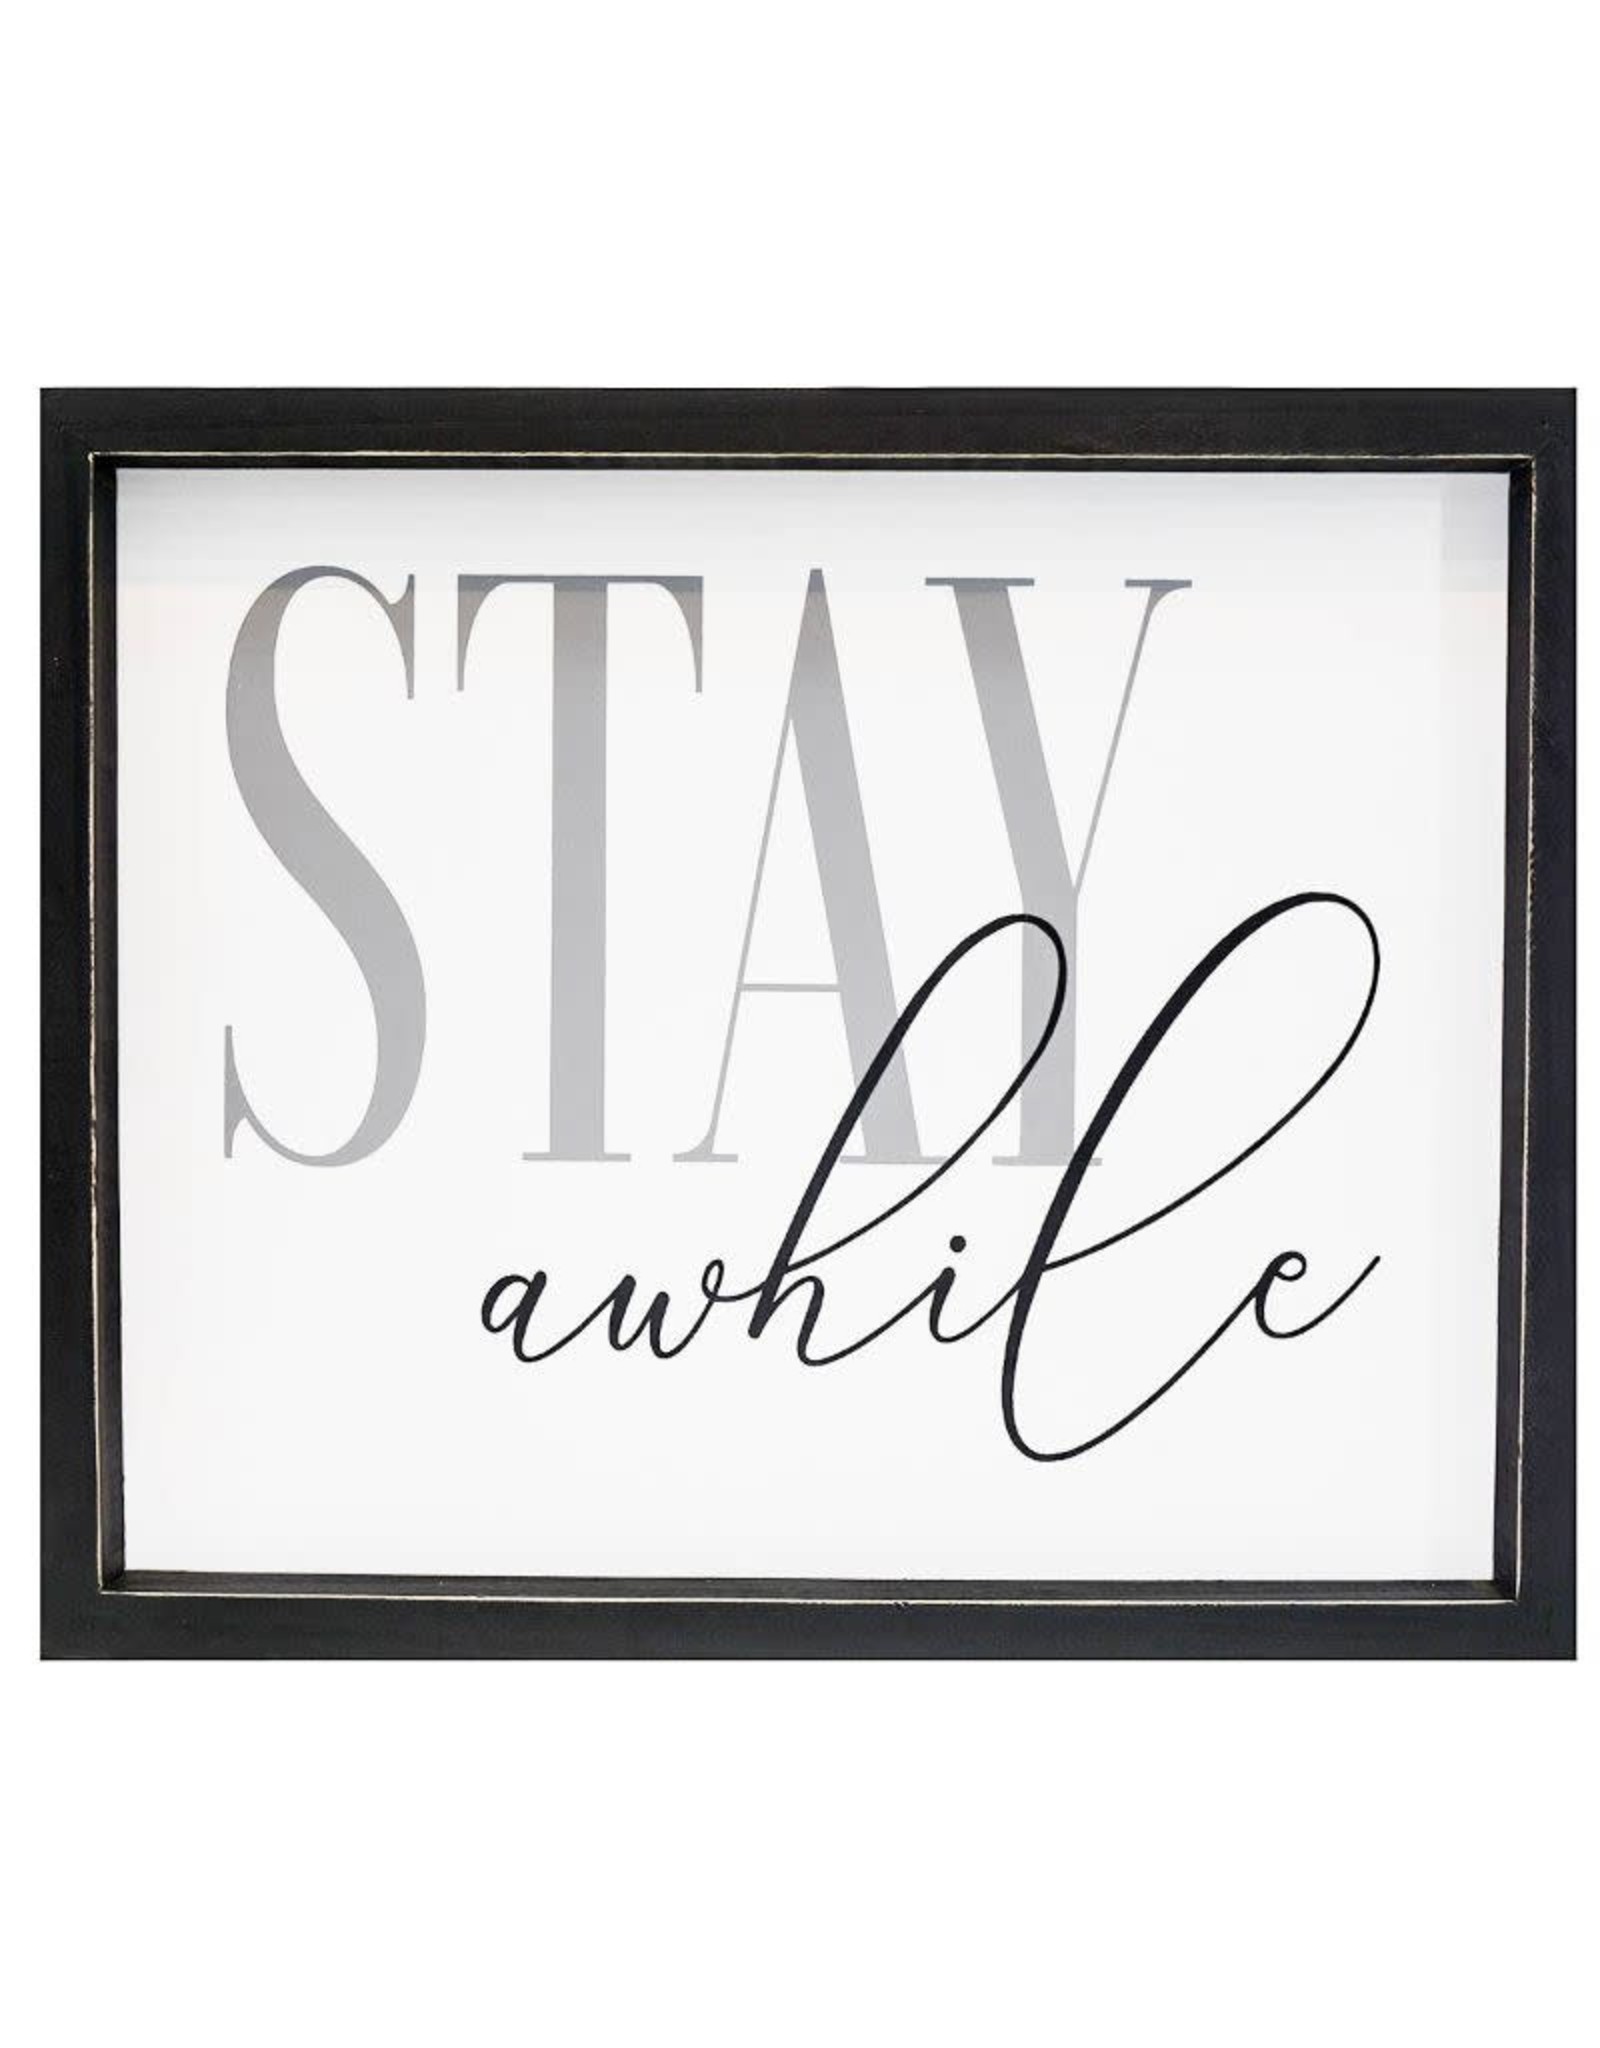 107-85100 Stay Awhile Sign 17 x 14